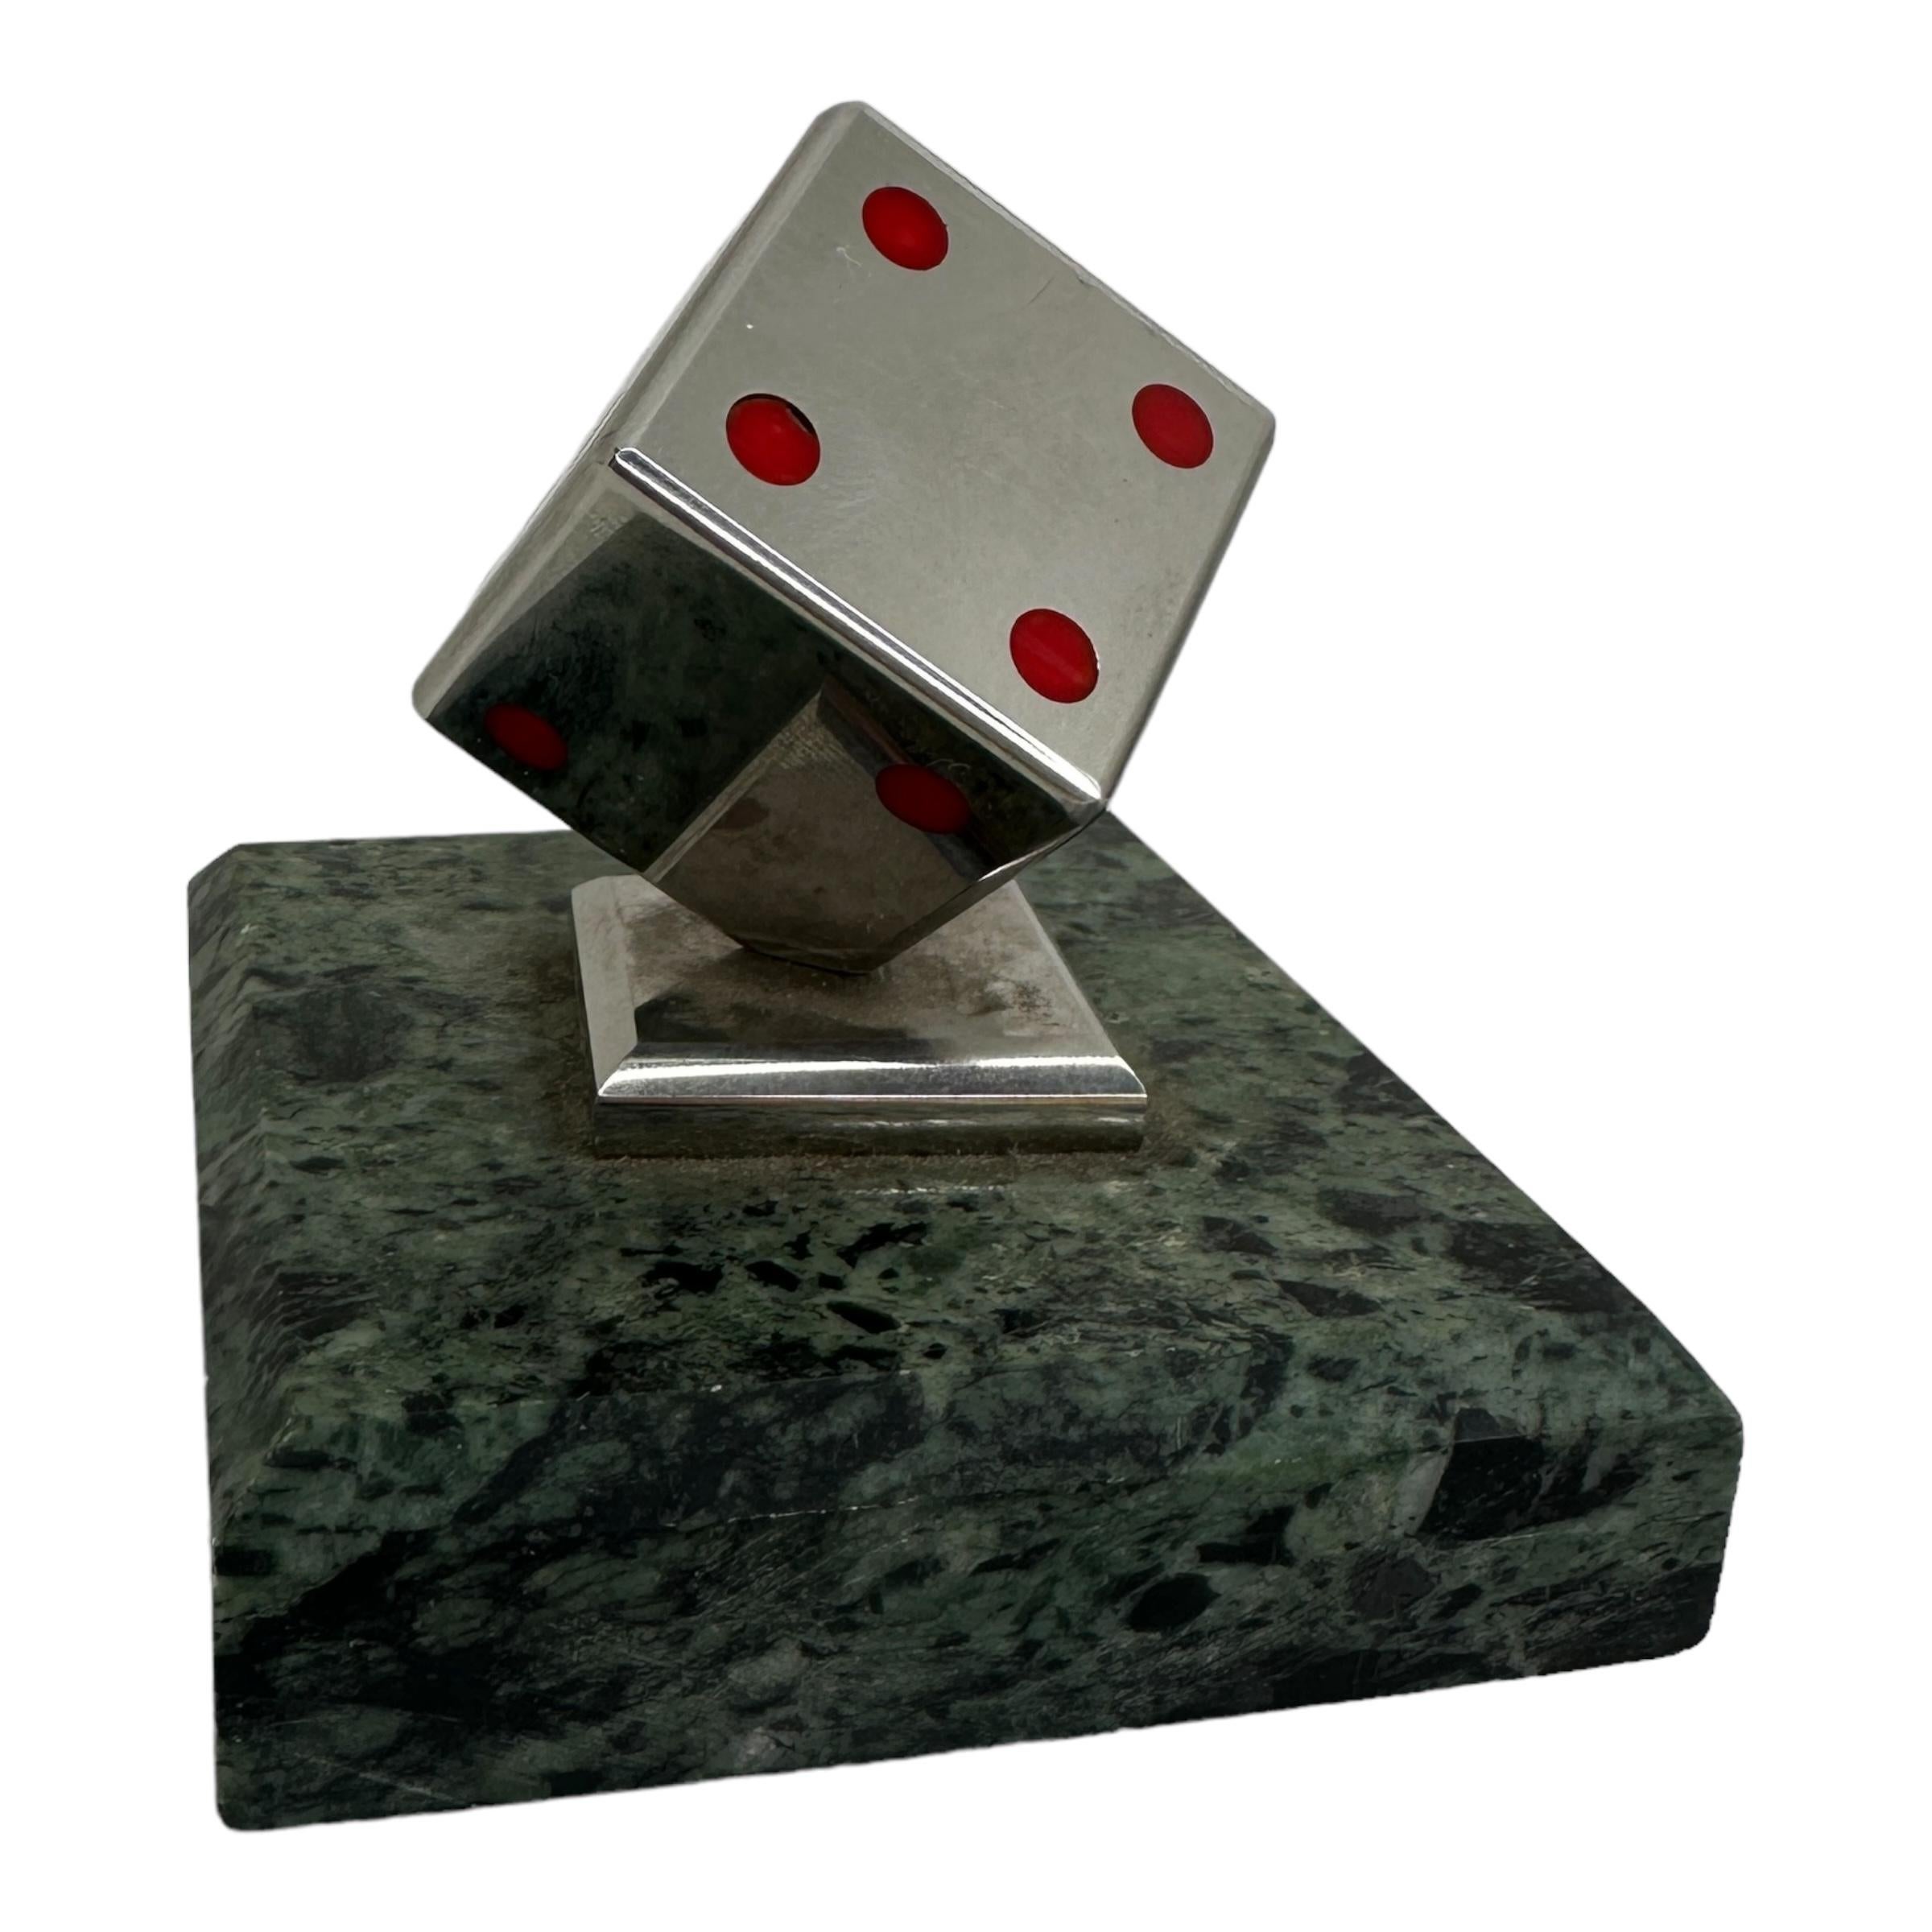 Dice Metal Statue on Marble Base Paper Weight Mid-Century Modern, German, 1970s For Sale 3